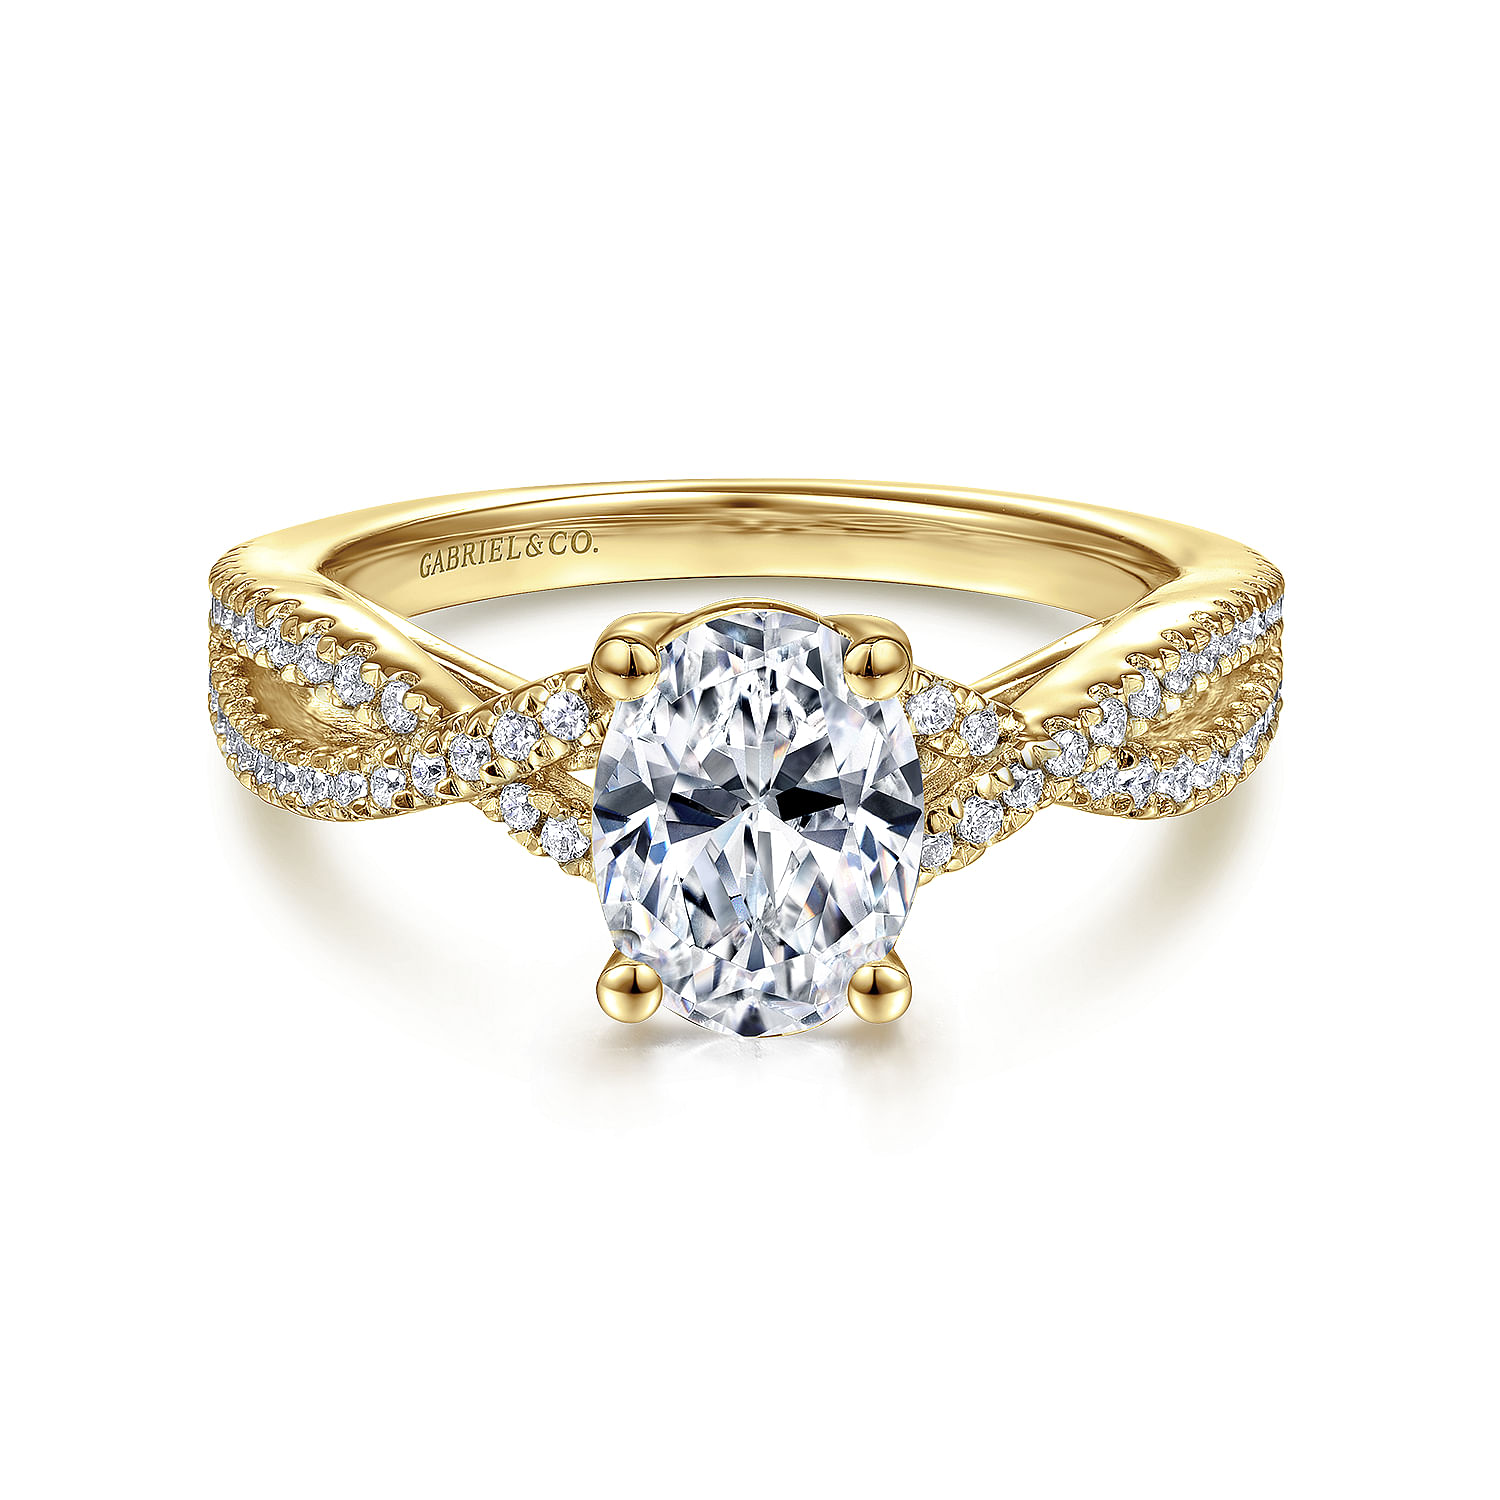 Gina - 14K Yellow Gold Twisted Oval Diamond Engagement Ring